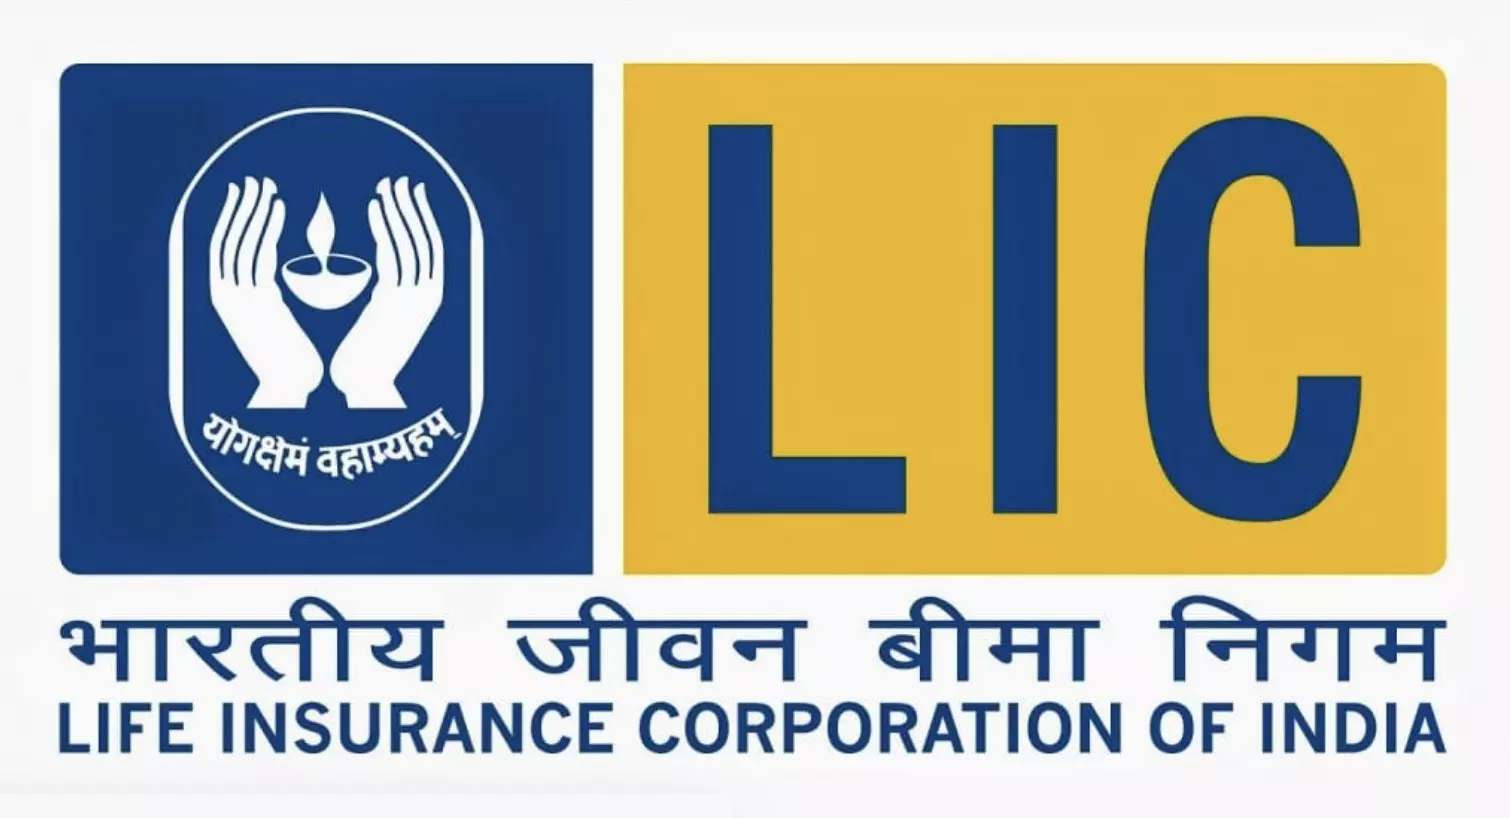 Govt approves 17% wage hike for 1.10 lakh employees of LIC